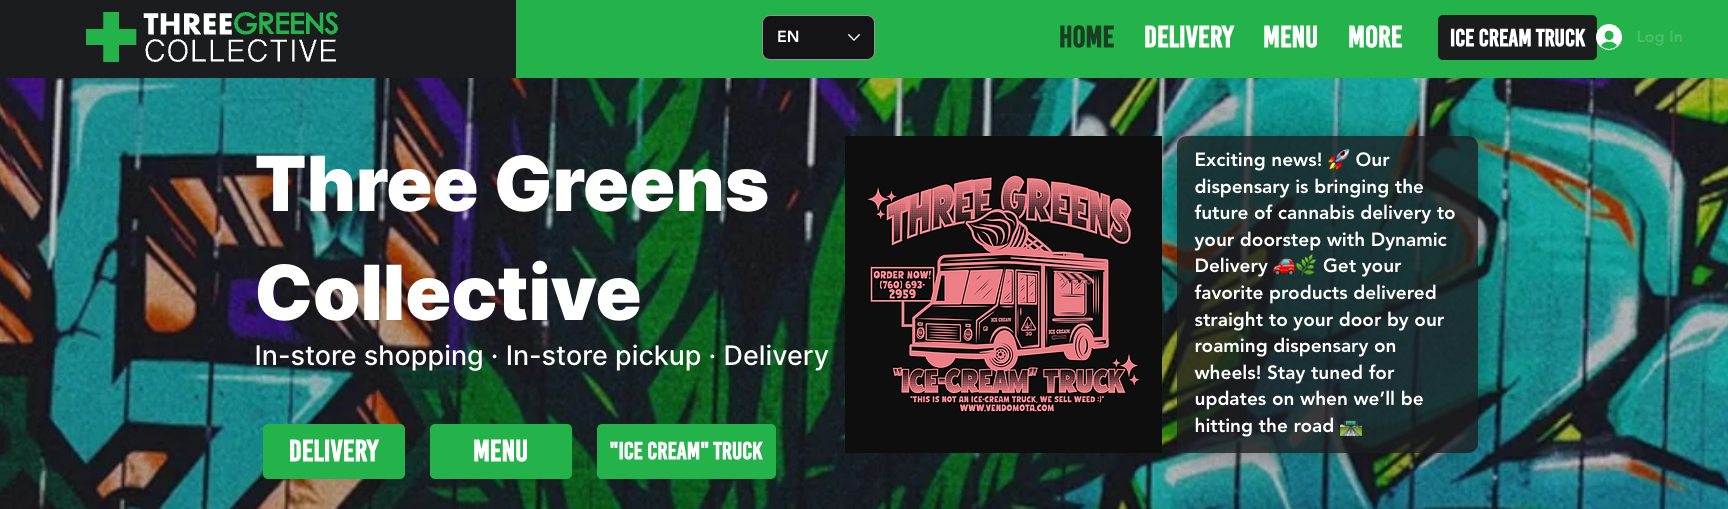 Three Greens Collective Ecommerce Dispensary Menu powered by Meadow